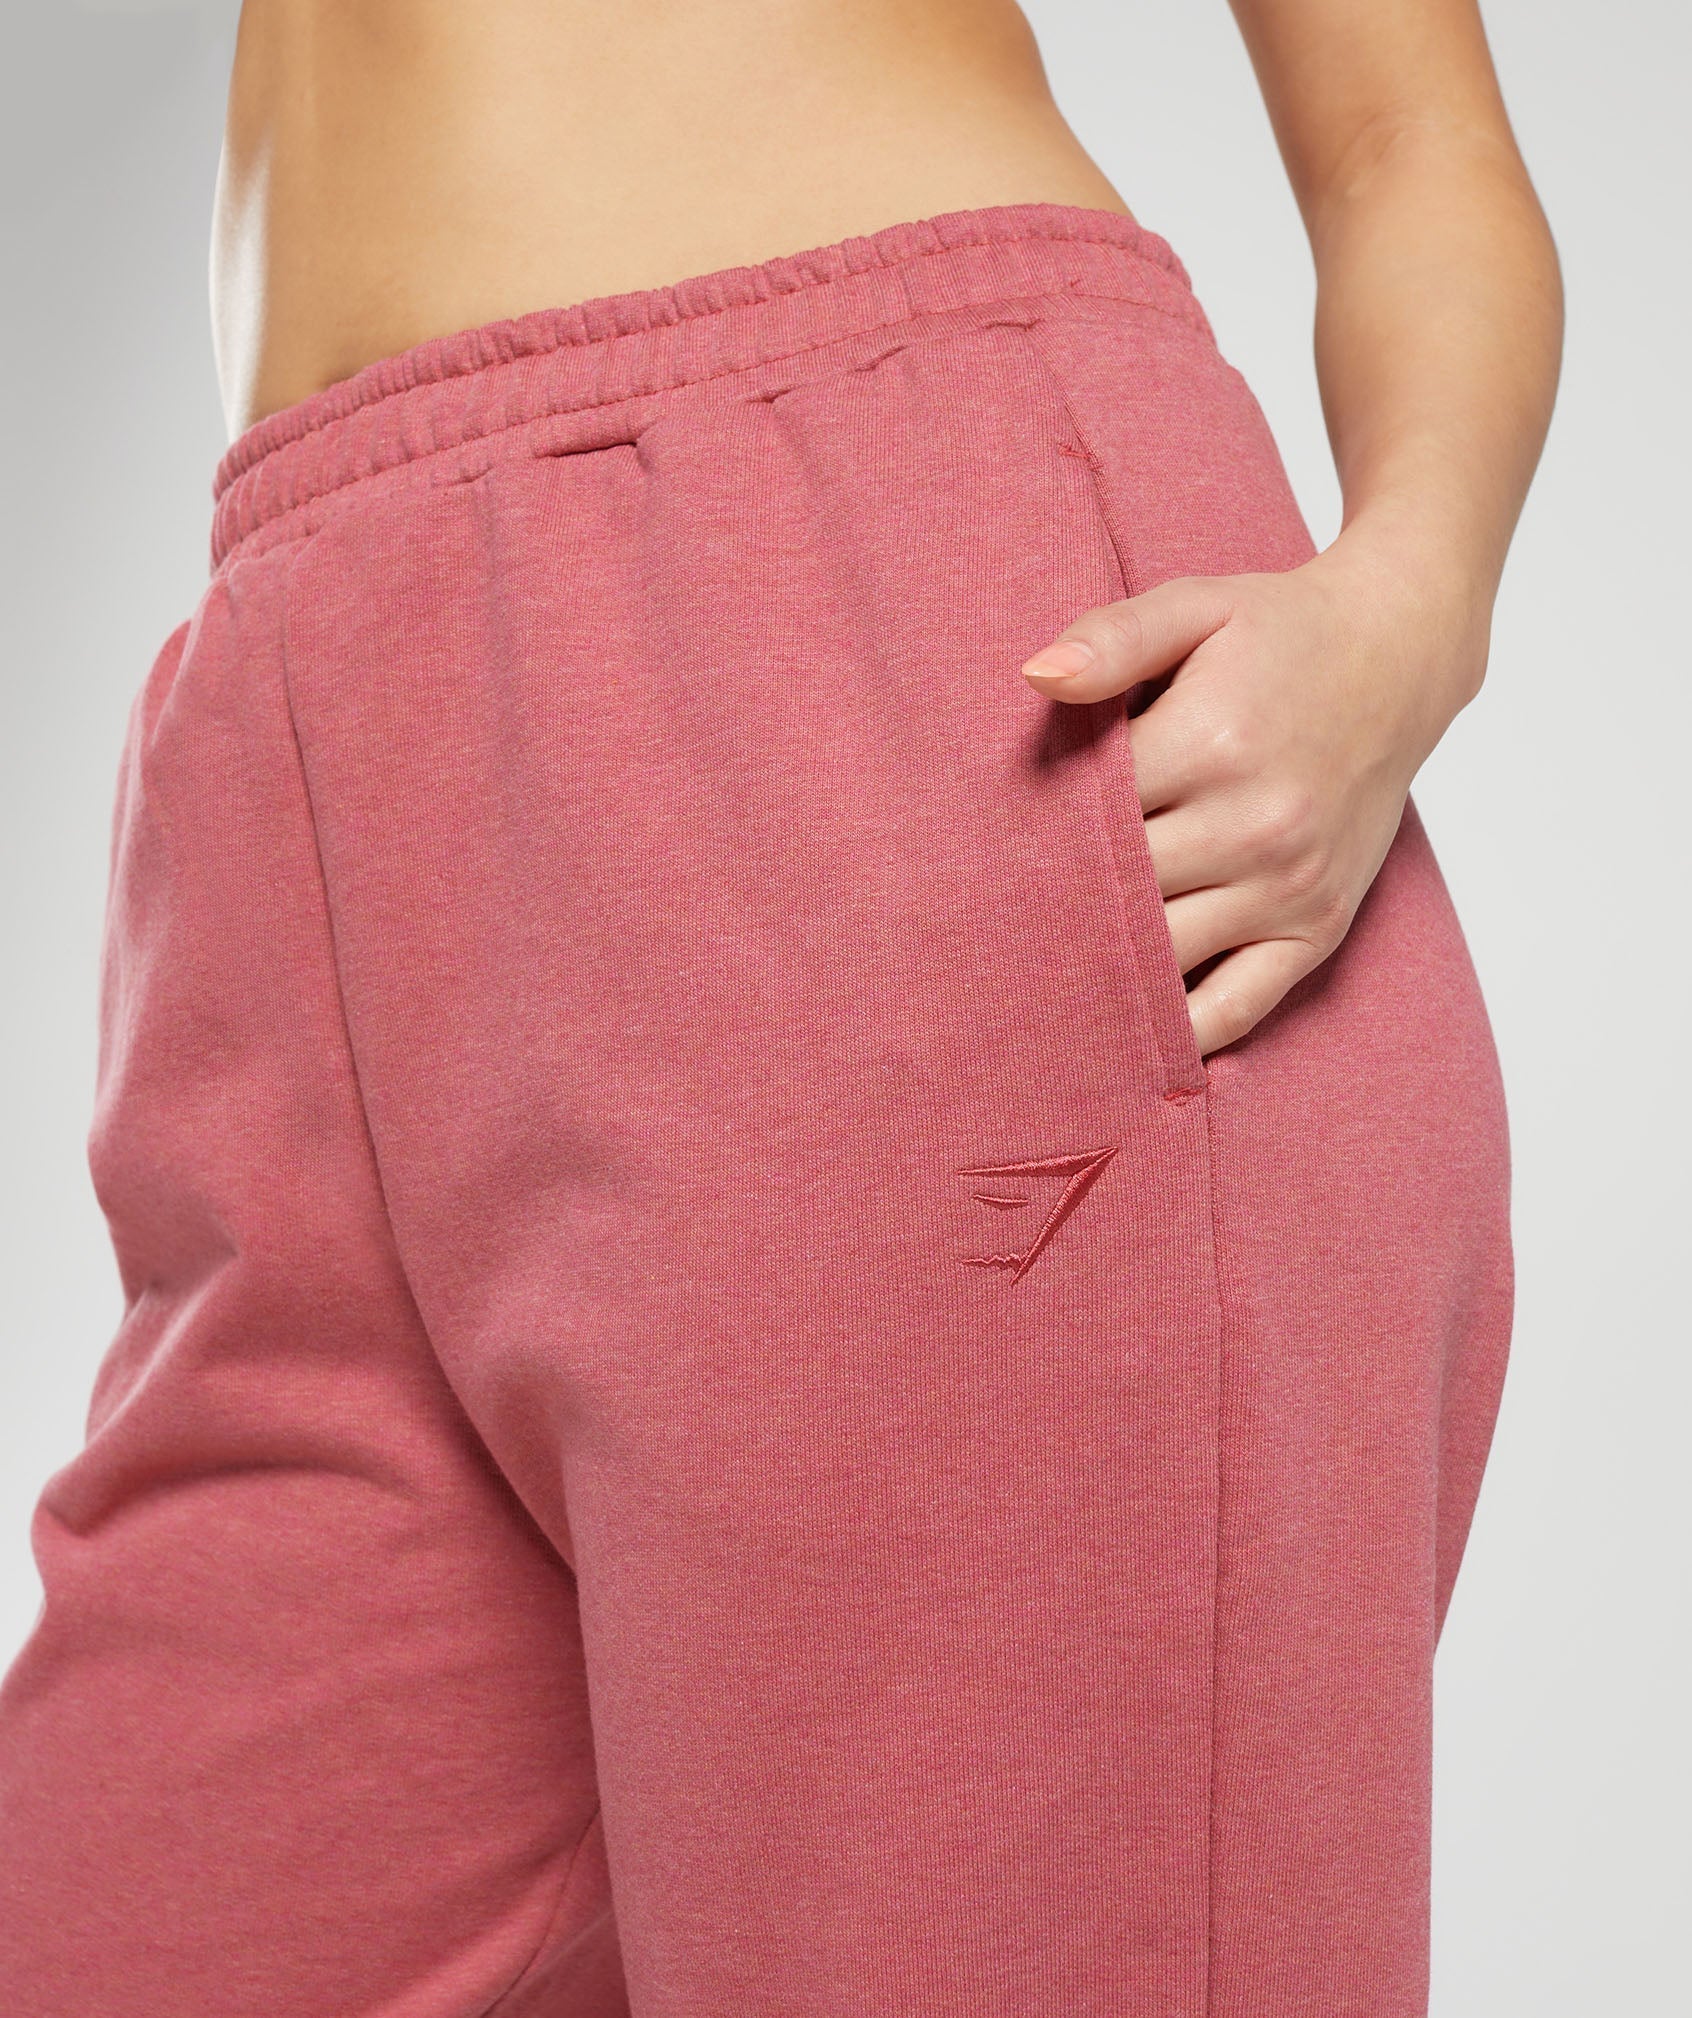 Rest Day Sweats Joggers in Bros Heritage Pink Marl - view 5